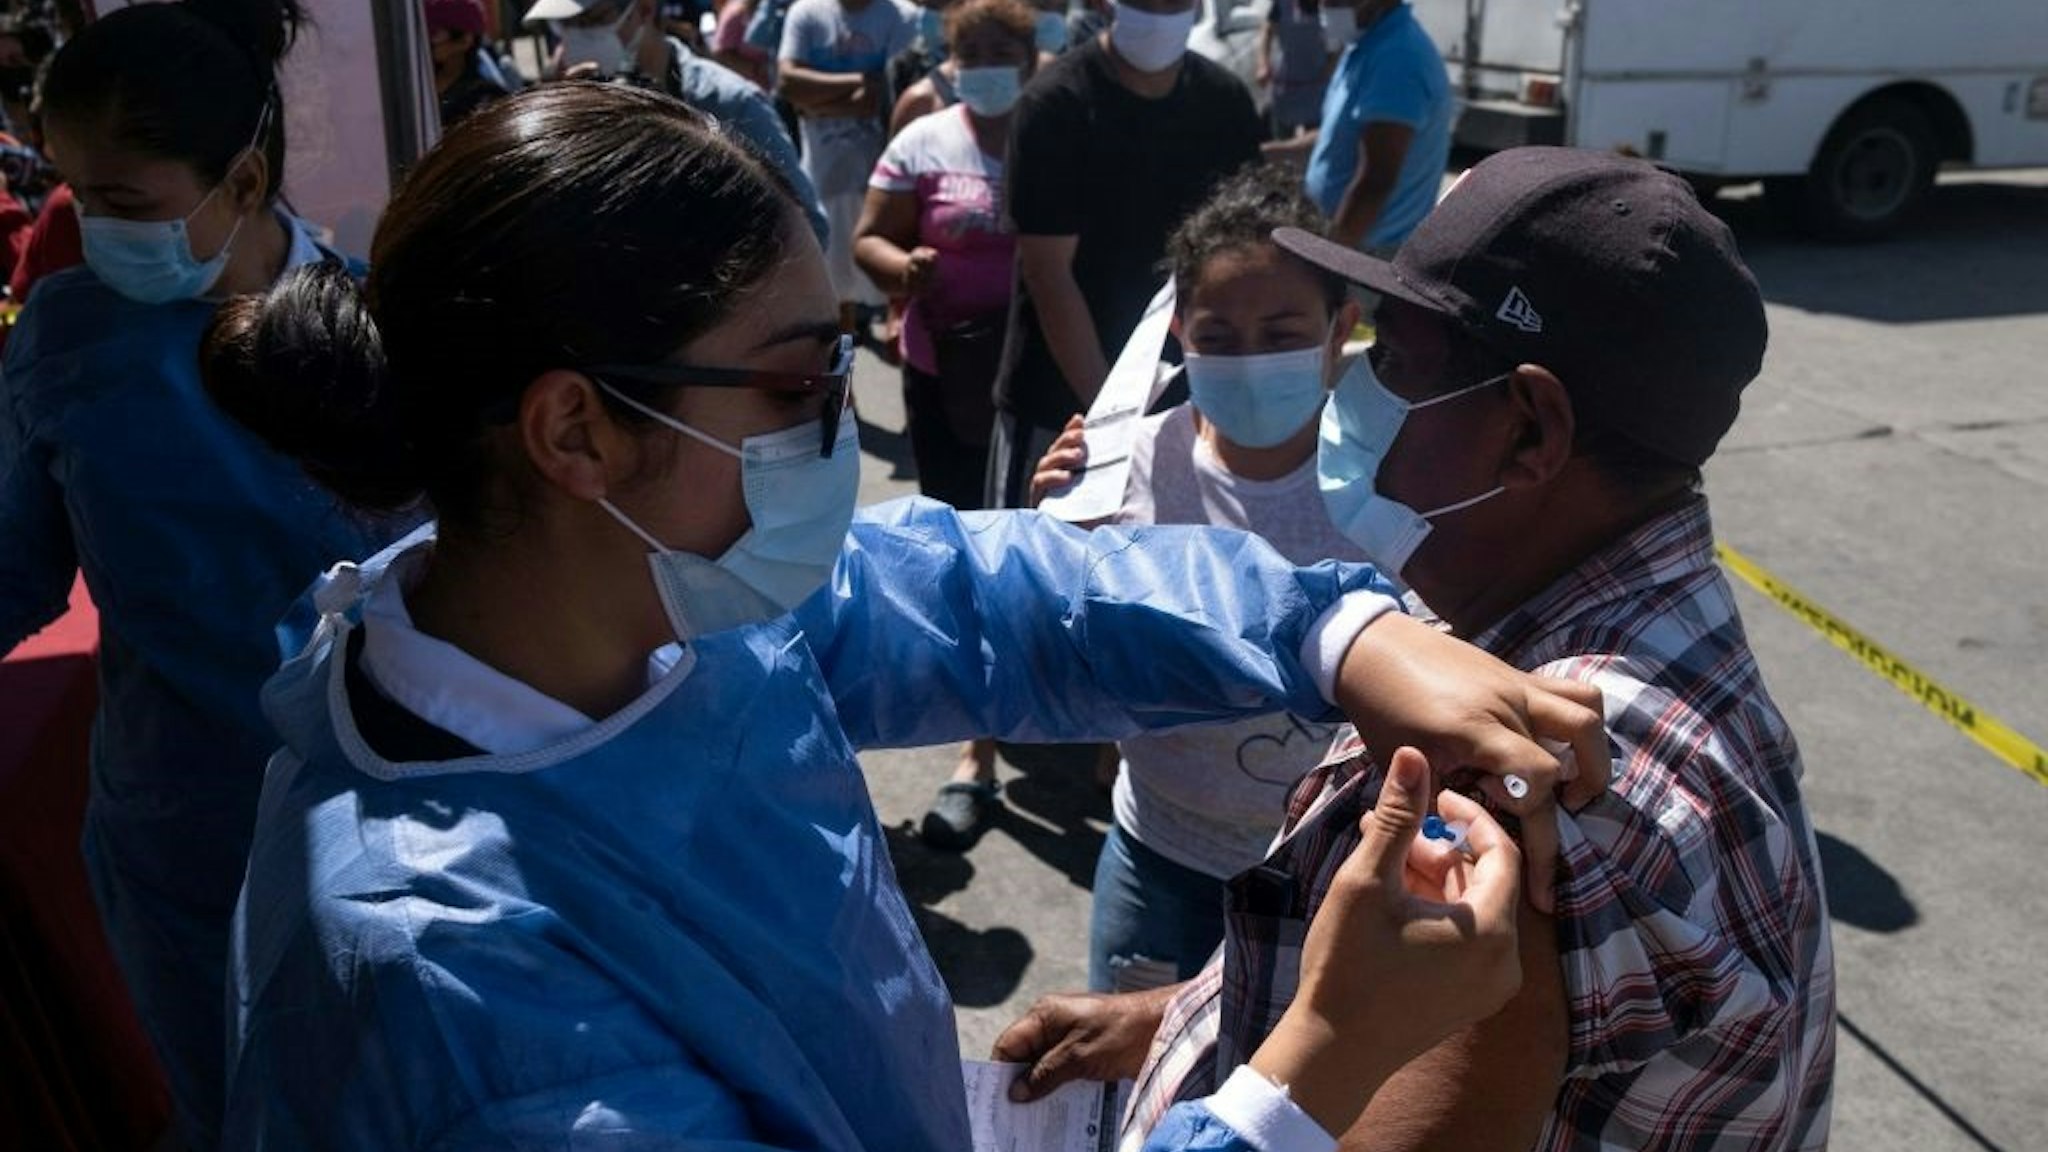 An asylum seeker camping at El Chaparral crossing port is vaccinated against COVID-19 in Tijuana, Baja California state, Mexico, on the border with the US, on August 3, 2021.